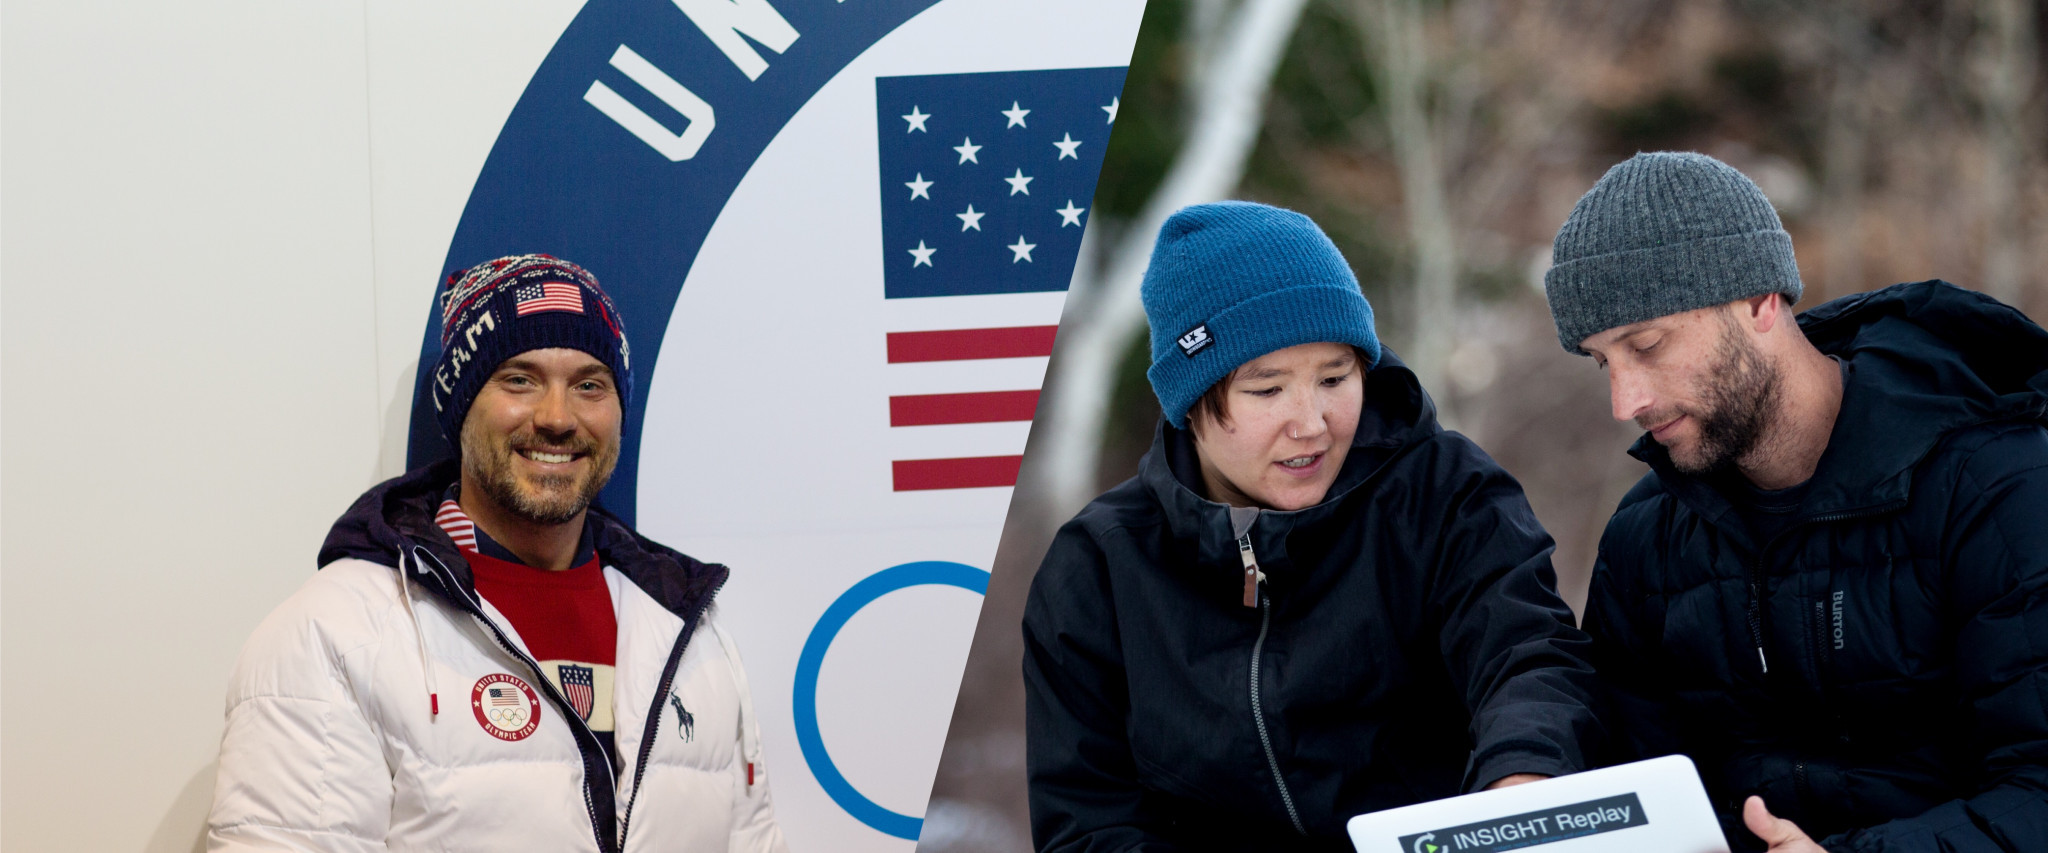 DJ Montigny and Jeff Archibald, U.S. Ski & Snowboard’s coaches for freeski slopestyle and snowboardcross respectively, are stepping down from their roles ©U.S. Ski & Snowboard - Sarah Brunson